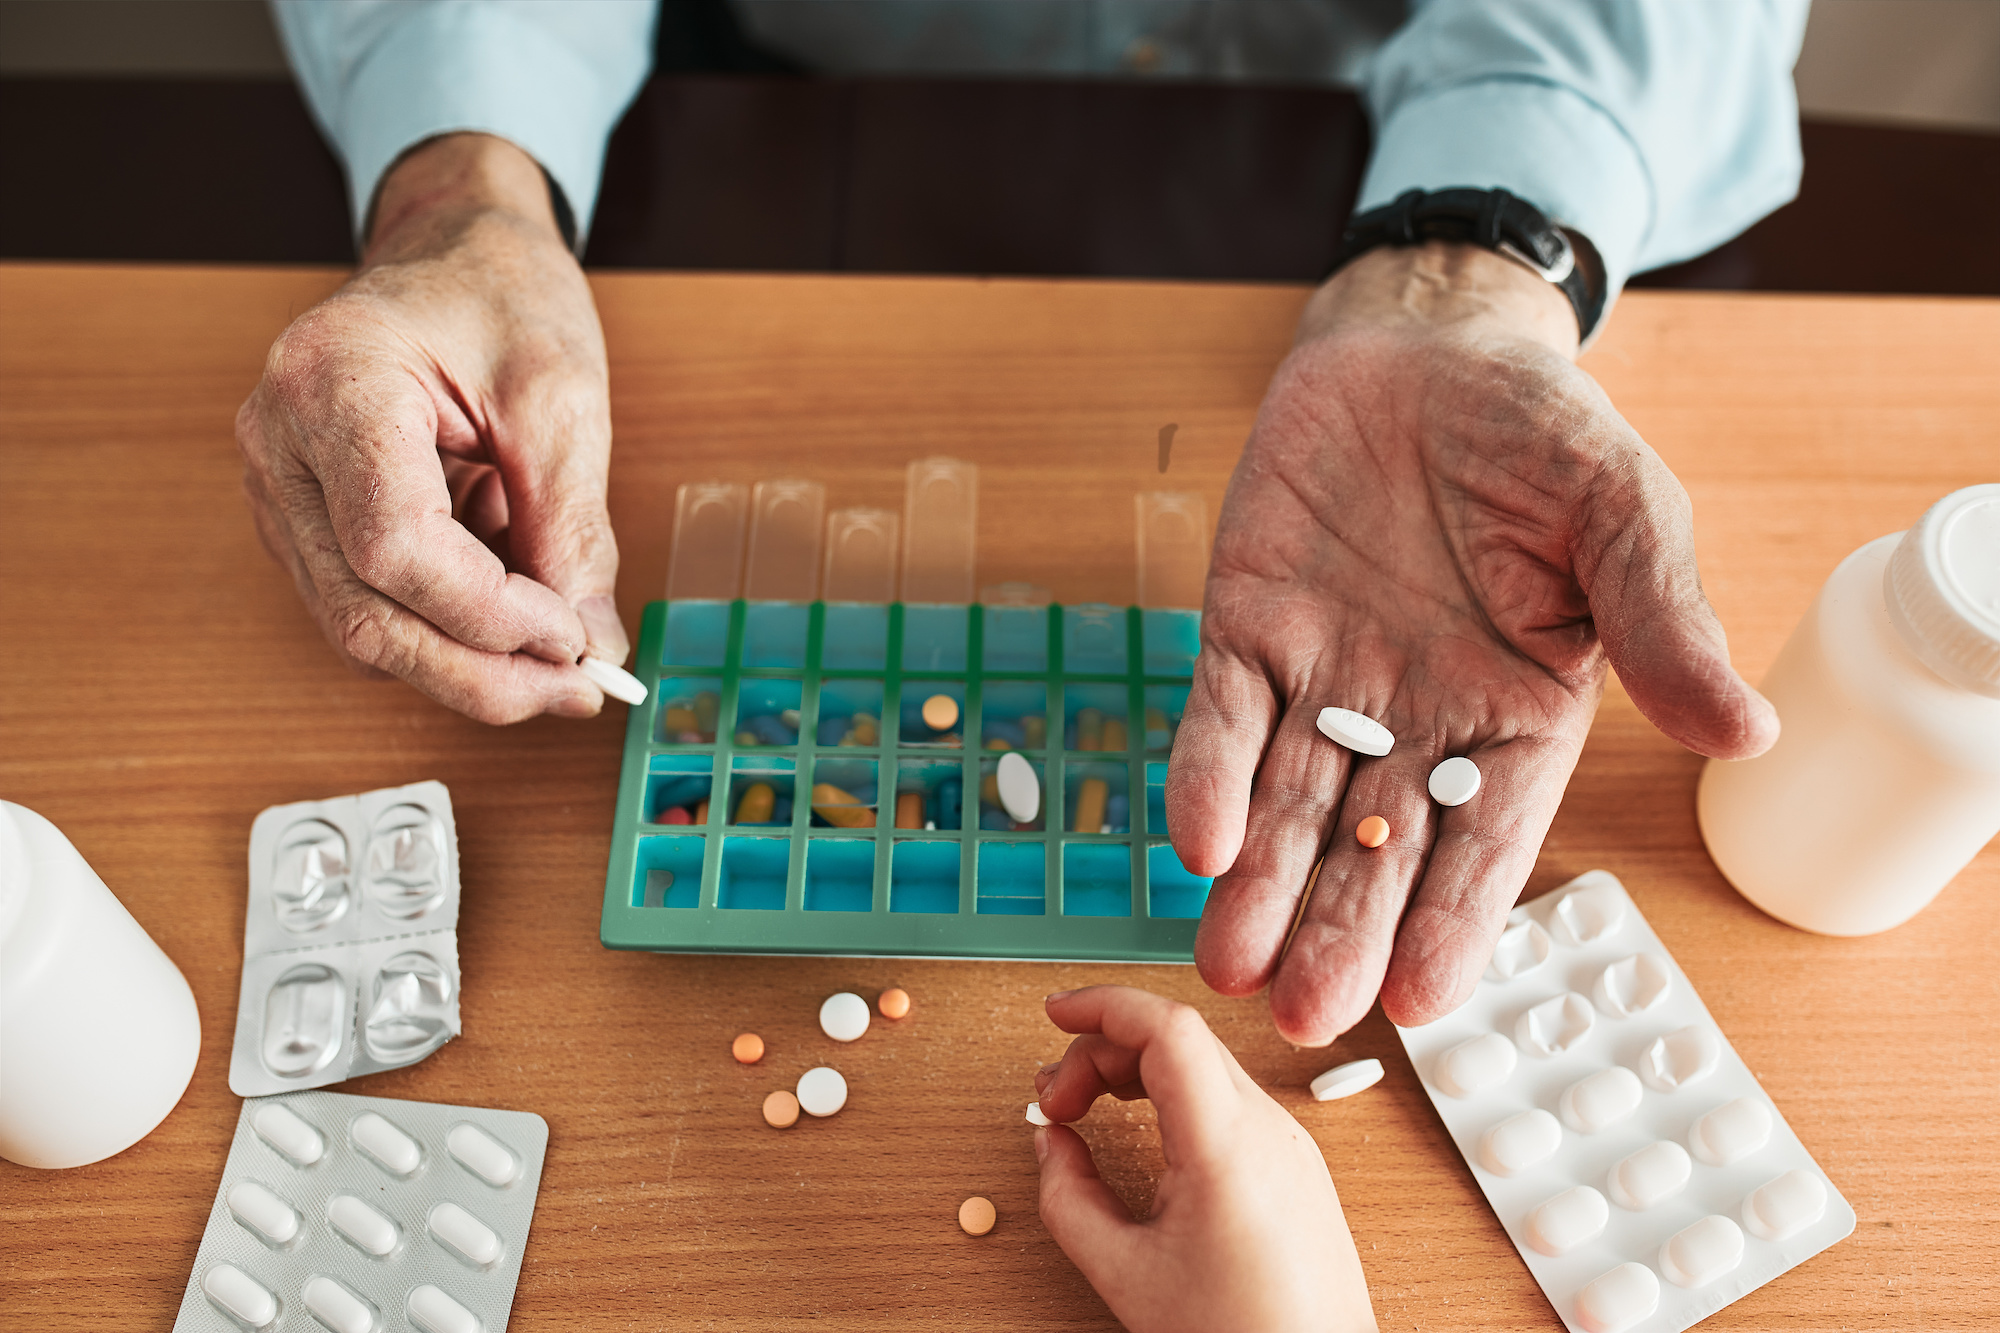 An elderly man holding medication in his hand as part of his medication reminders.